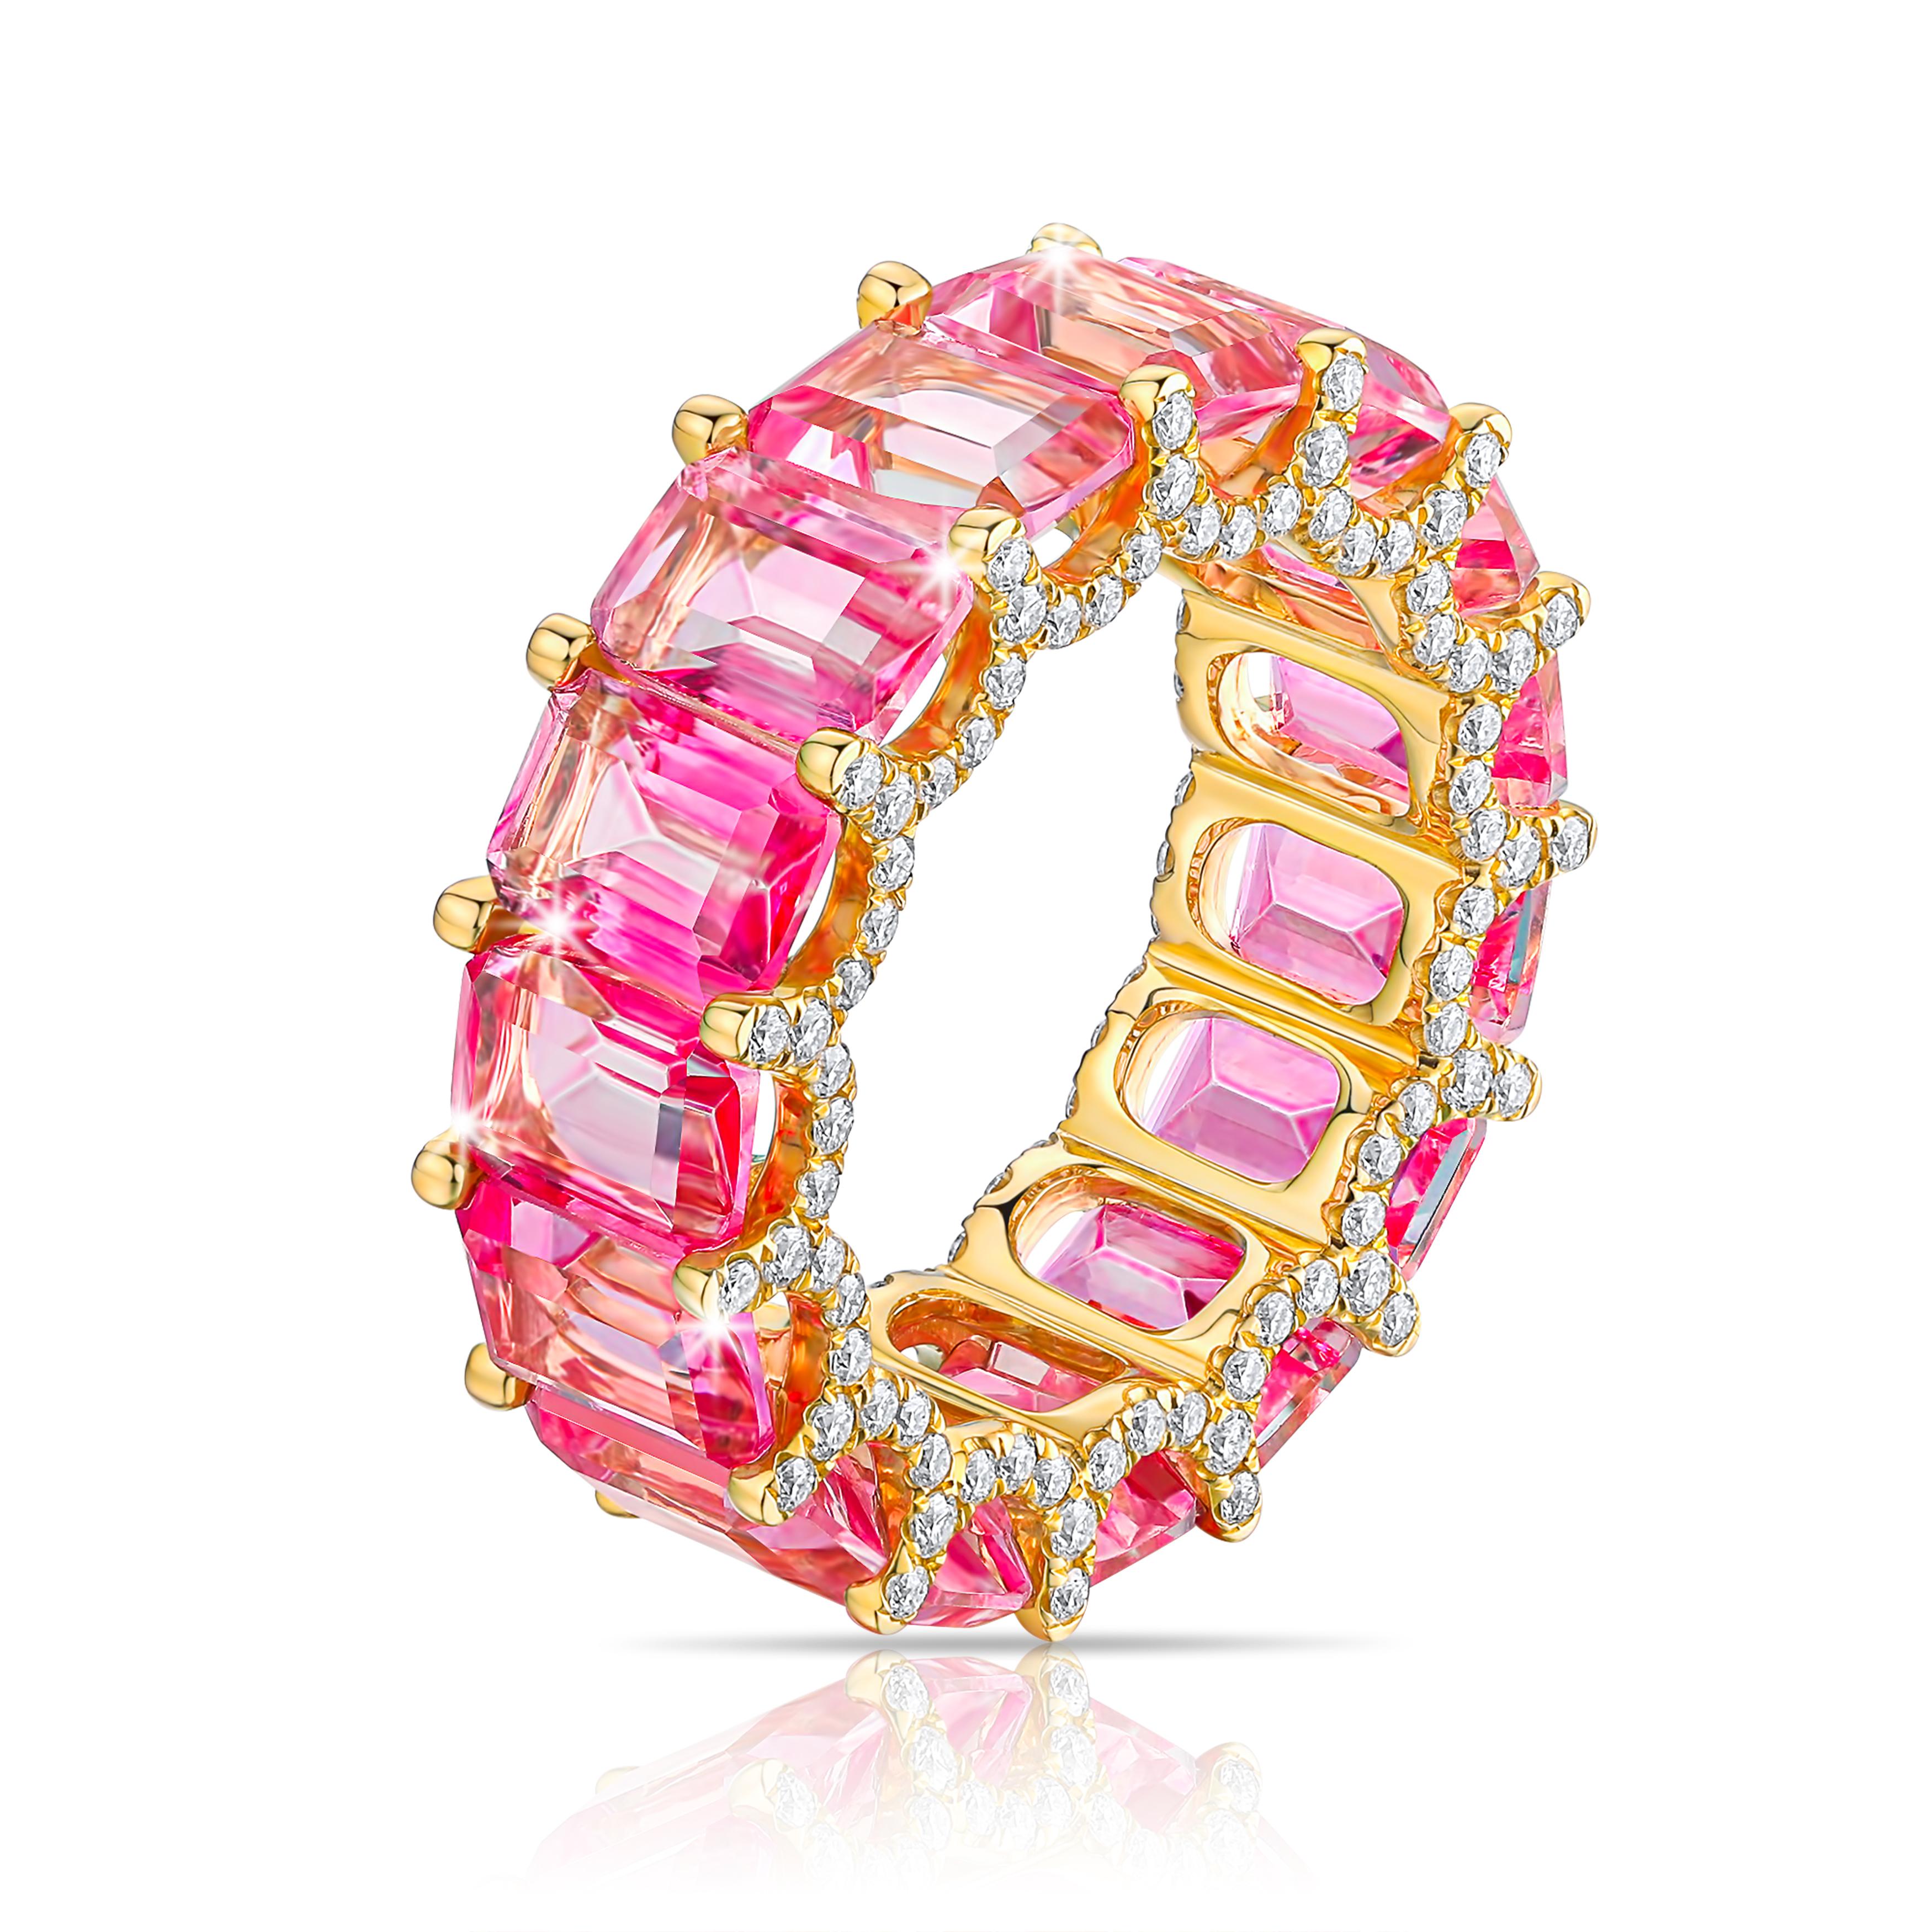 Modern Adorna Lux - Lisa’s Pink Eternity Band For Sale